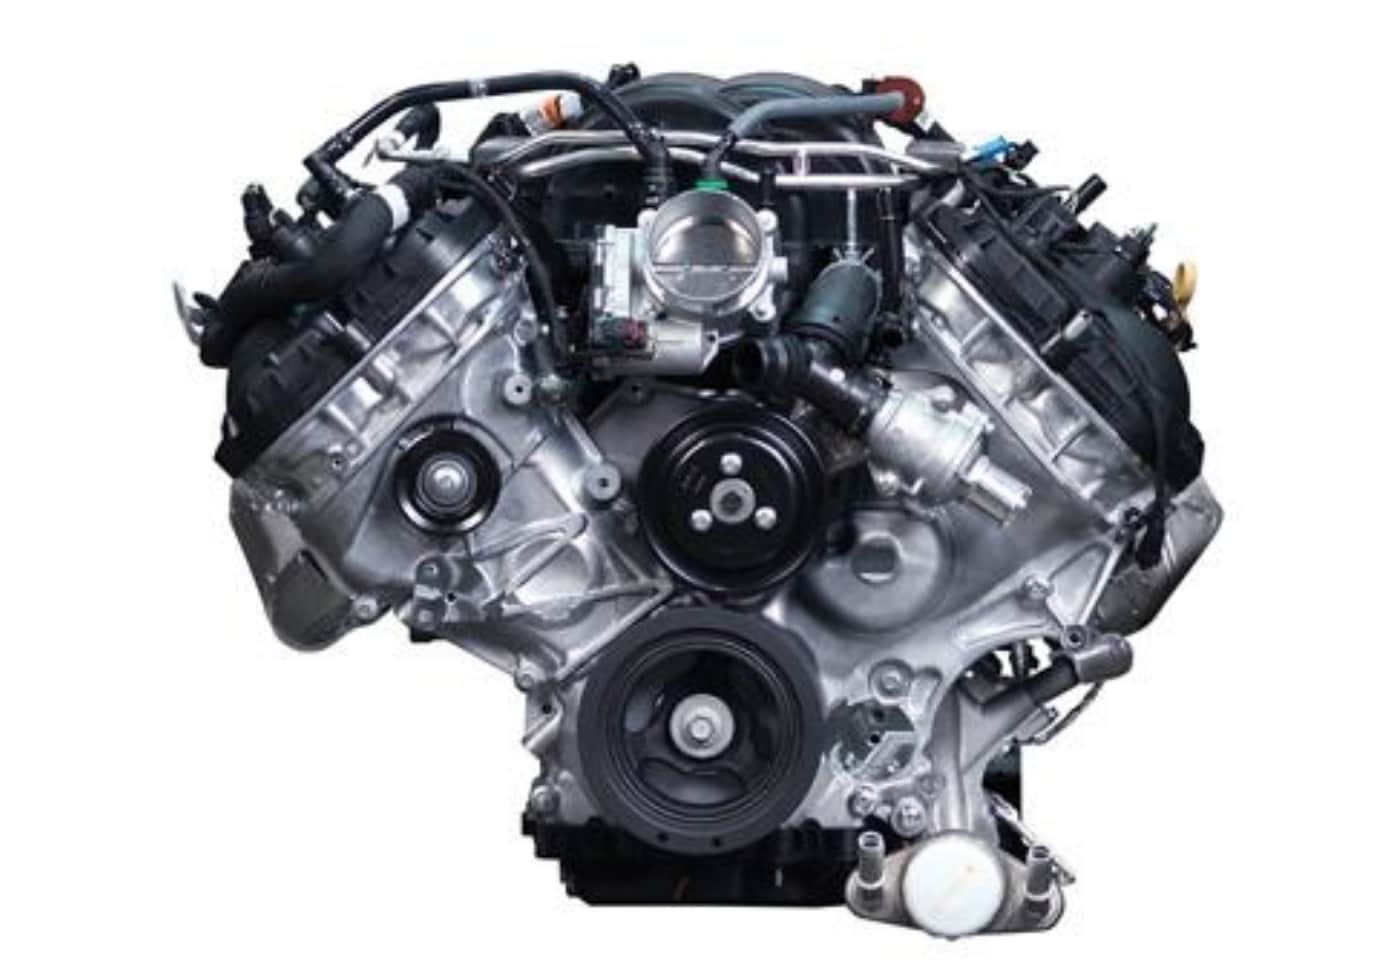 5.0L Ti-VCT V8 engine available on the Ford F-150